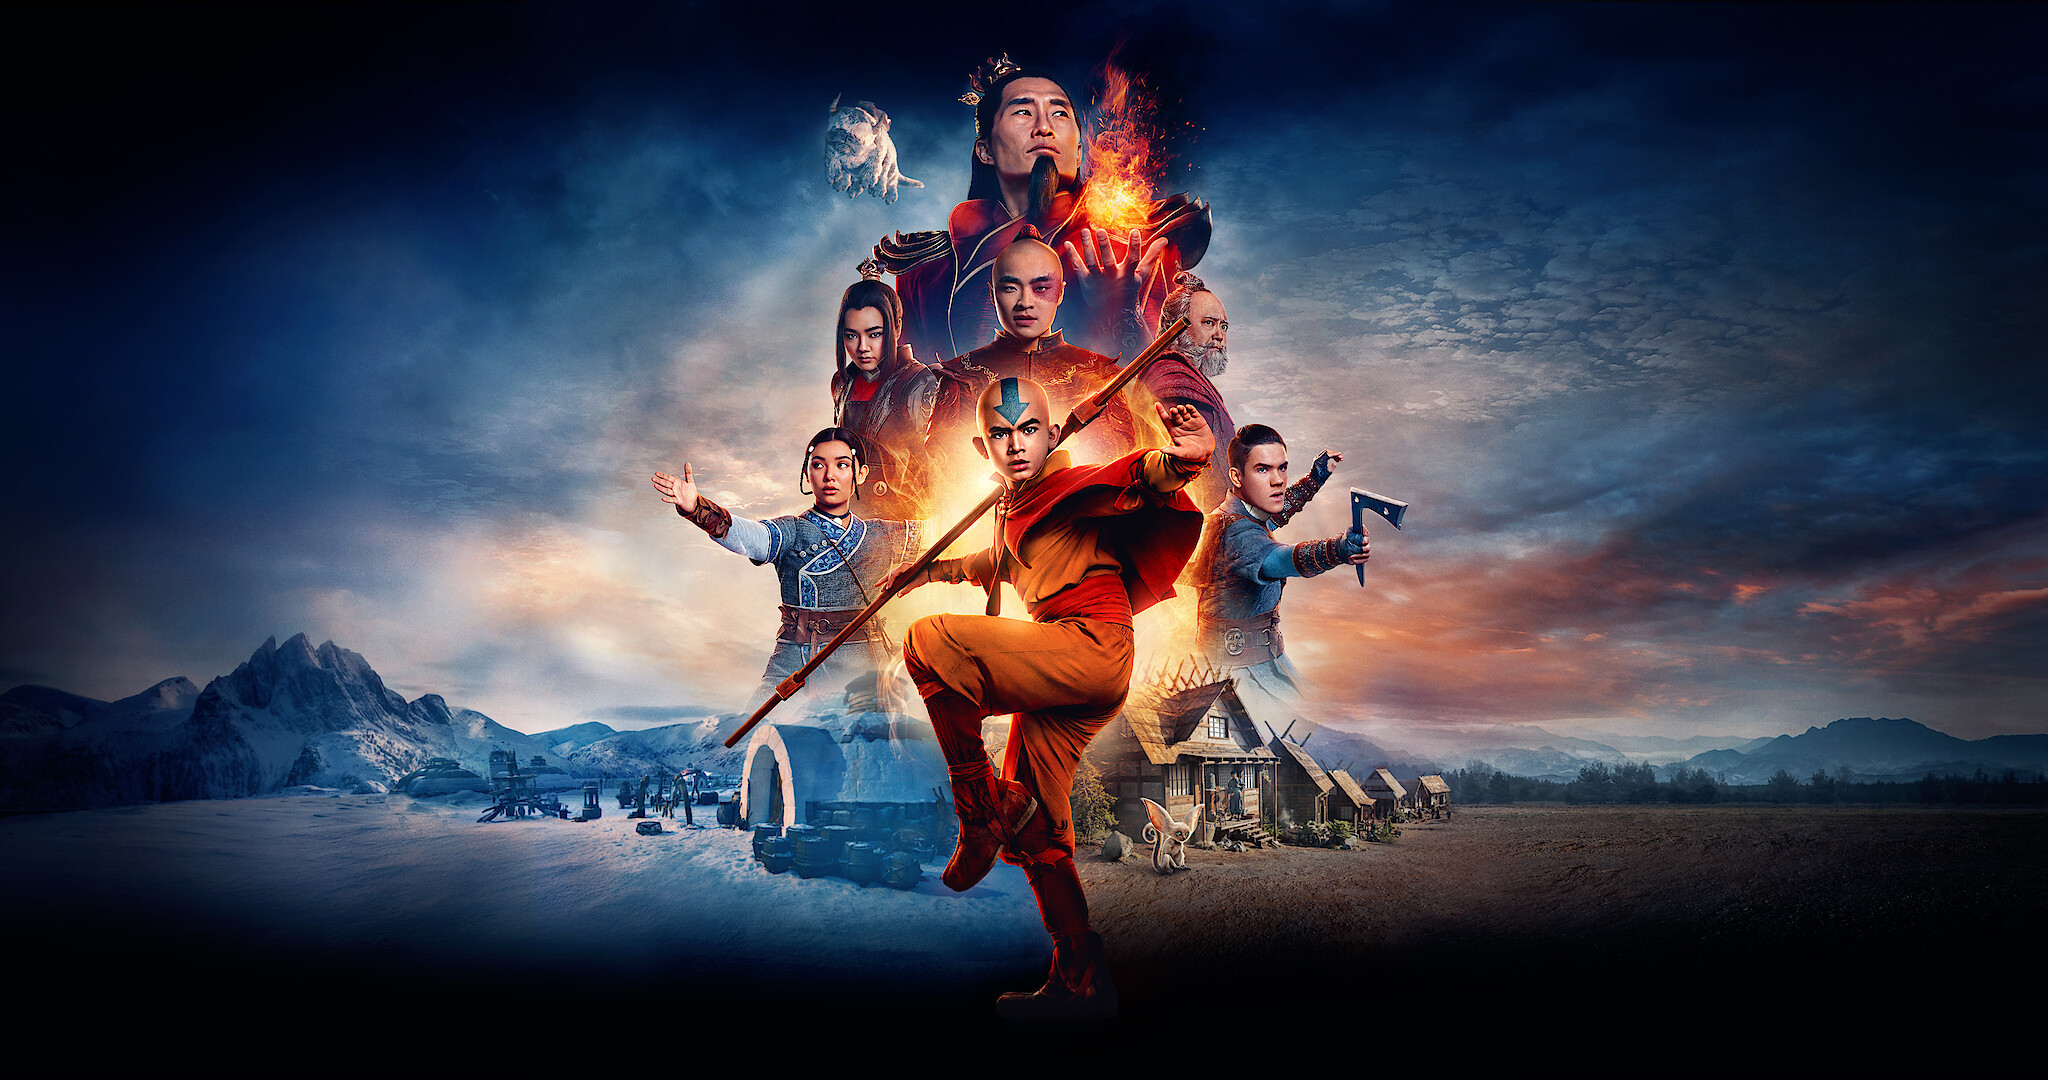 Avatar: The Last Airbender. 2024-present. Netflix.
Promotional poster of the main cast for the live-action Avatar: The Last Airbender